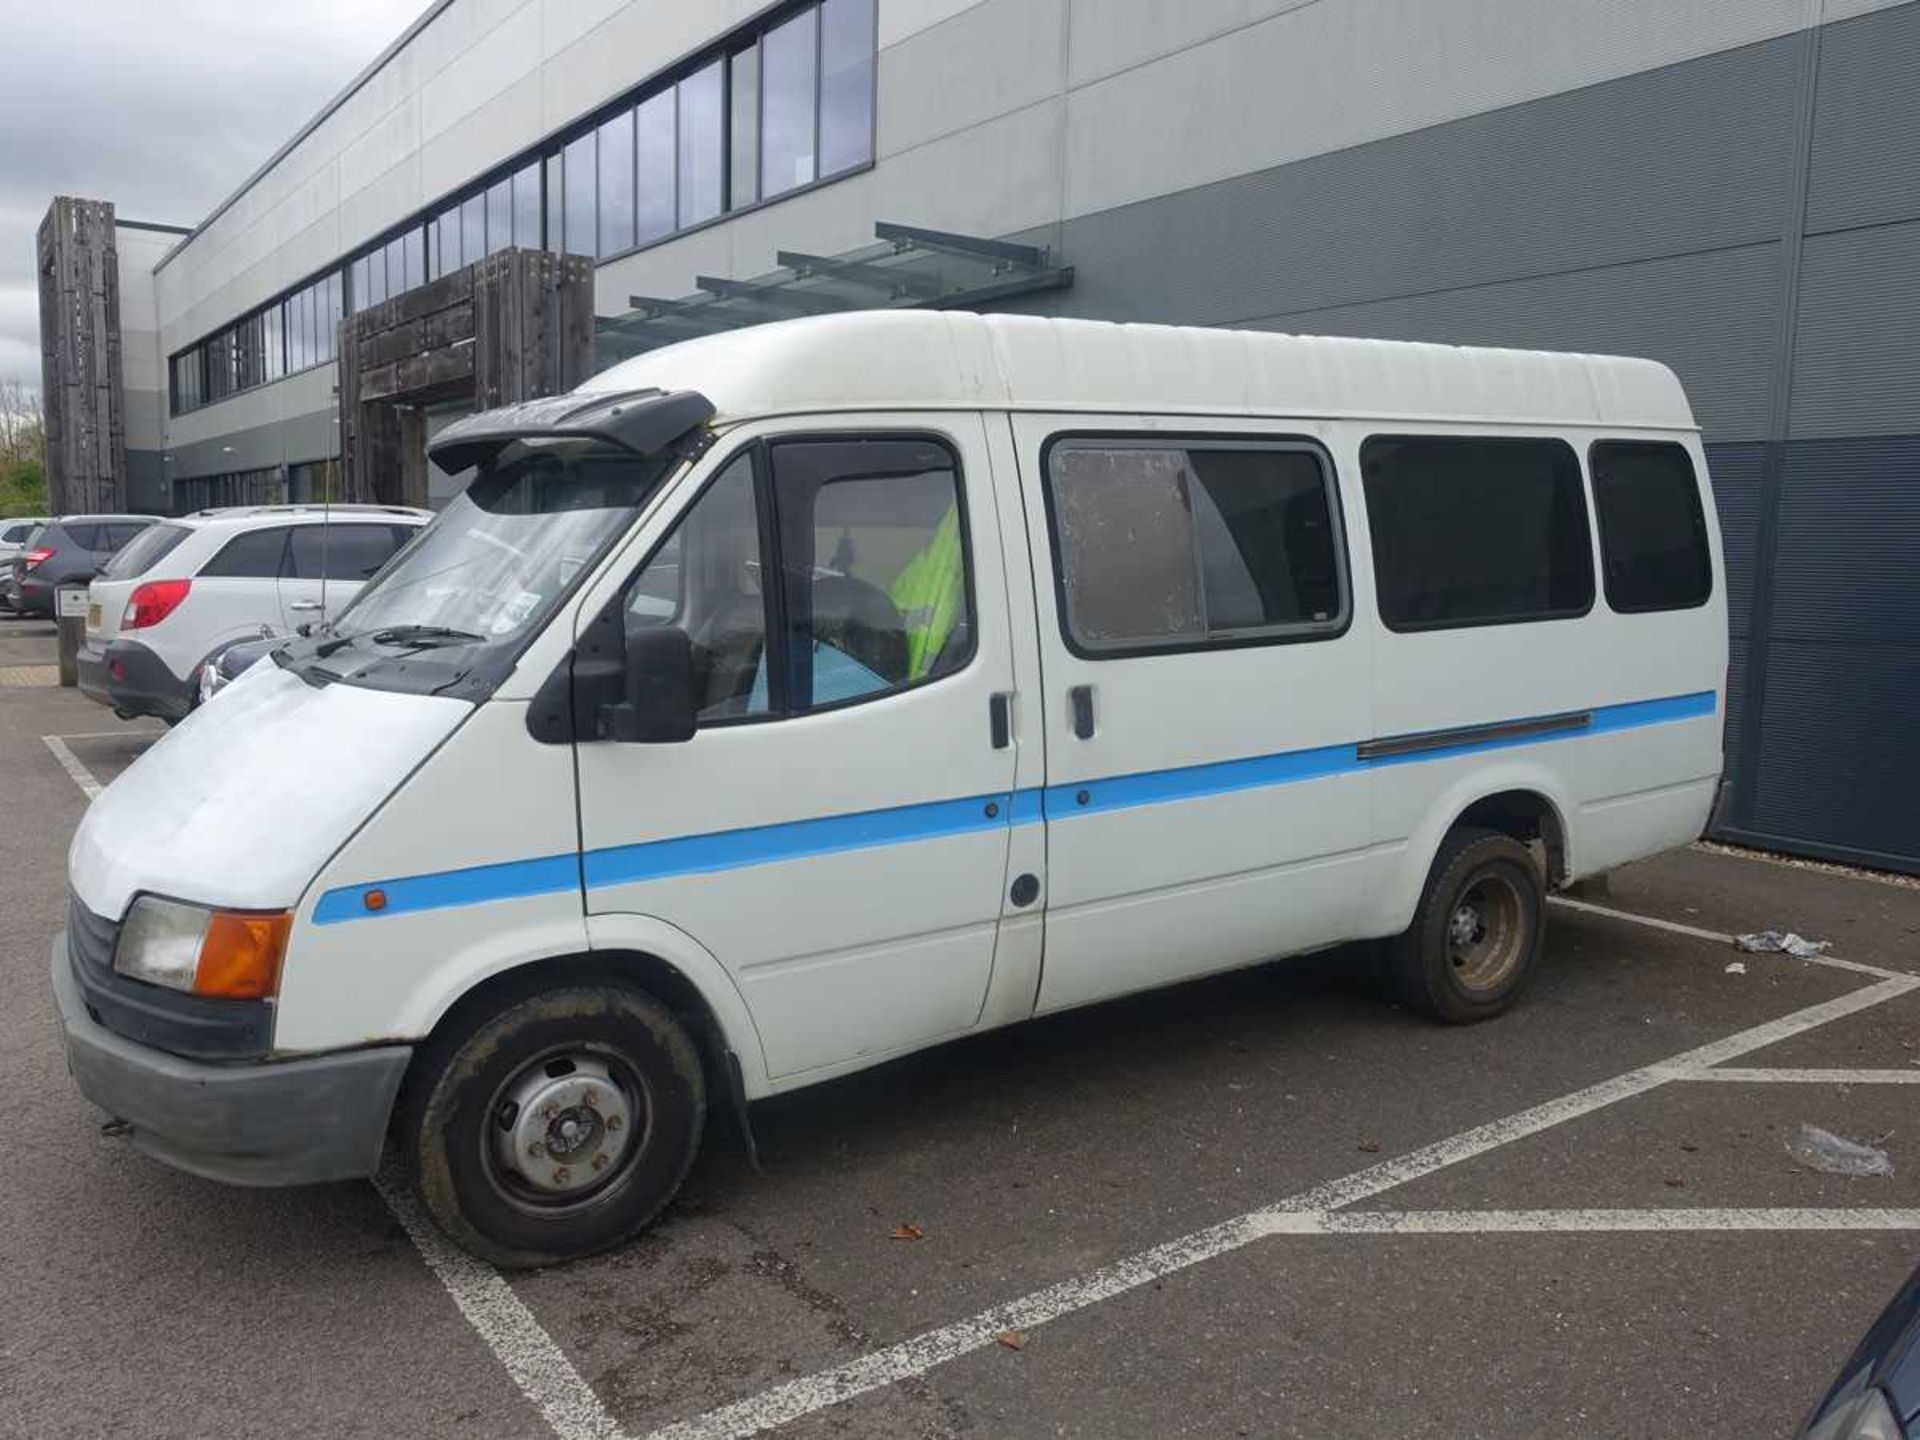 (E991 DJH) 1987 Ford Transit Mk. III day / race / camper van - converted from 150 minibus, 2500cc - Image 2 of 7